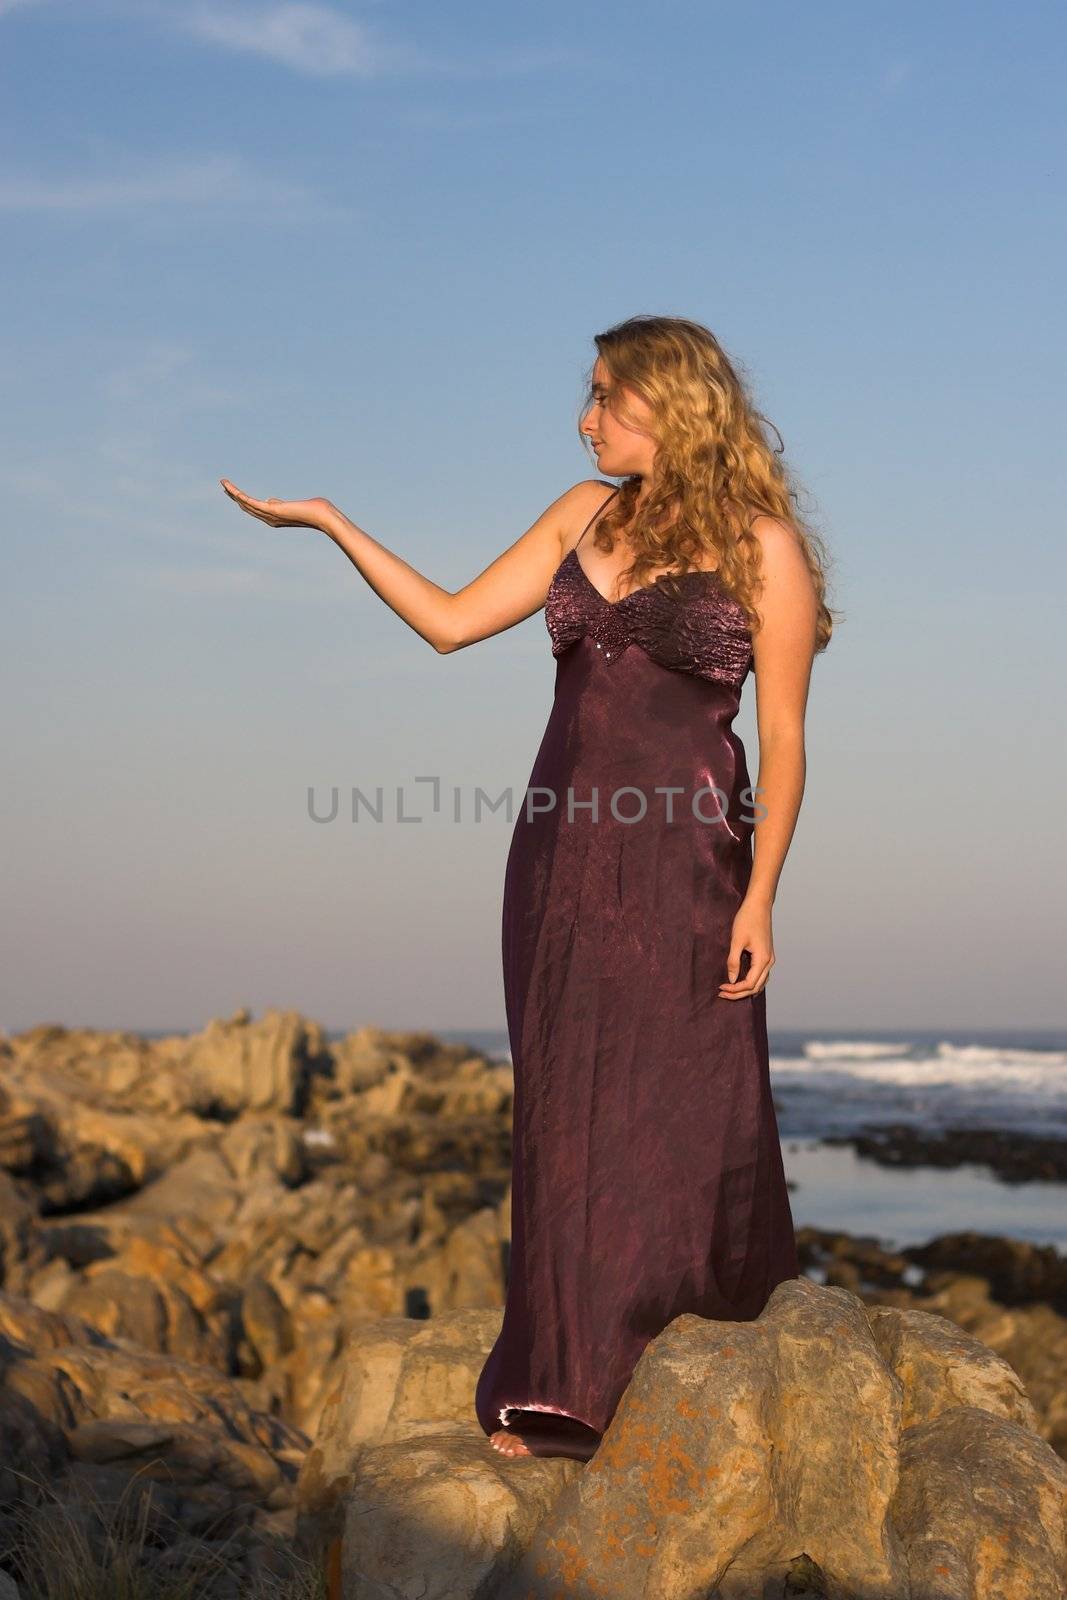 Girl in purple dress holding one arm up